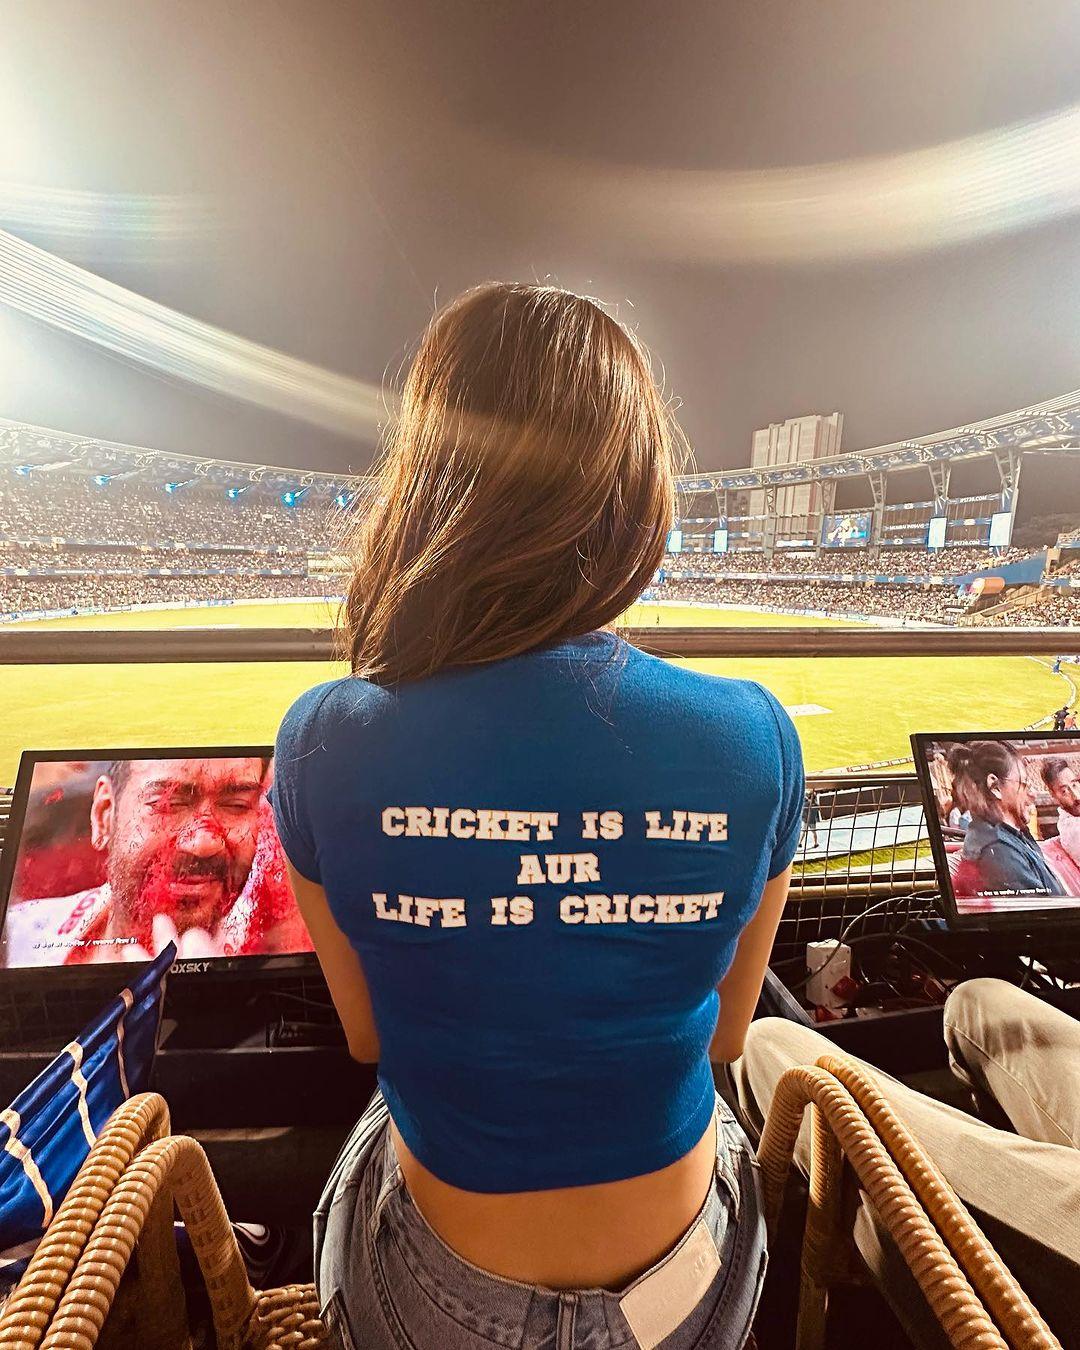 Her crop top had 'Mahi' with jersey number 6 written on the front. While the back of the top has 'Cricket is life aur life is cricket' printed on it